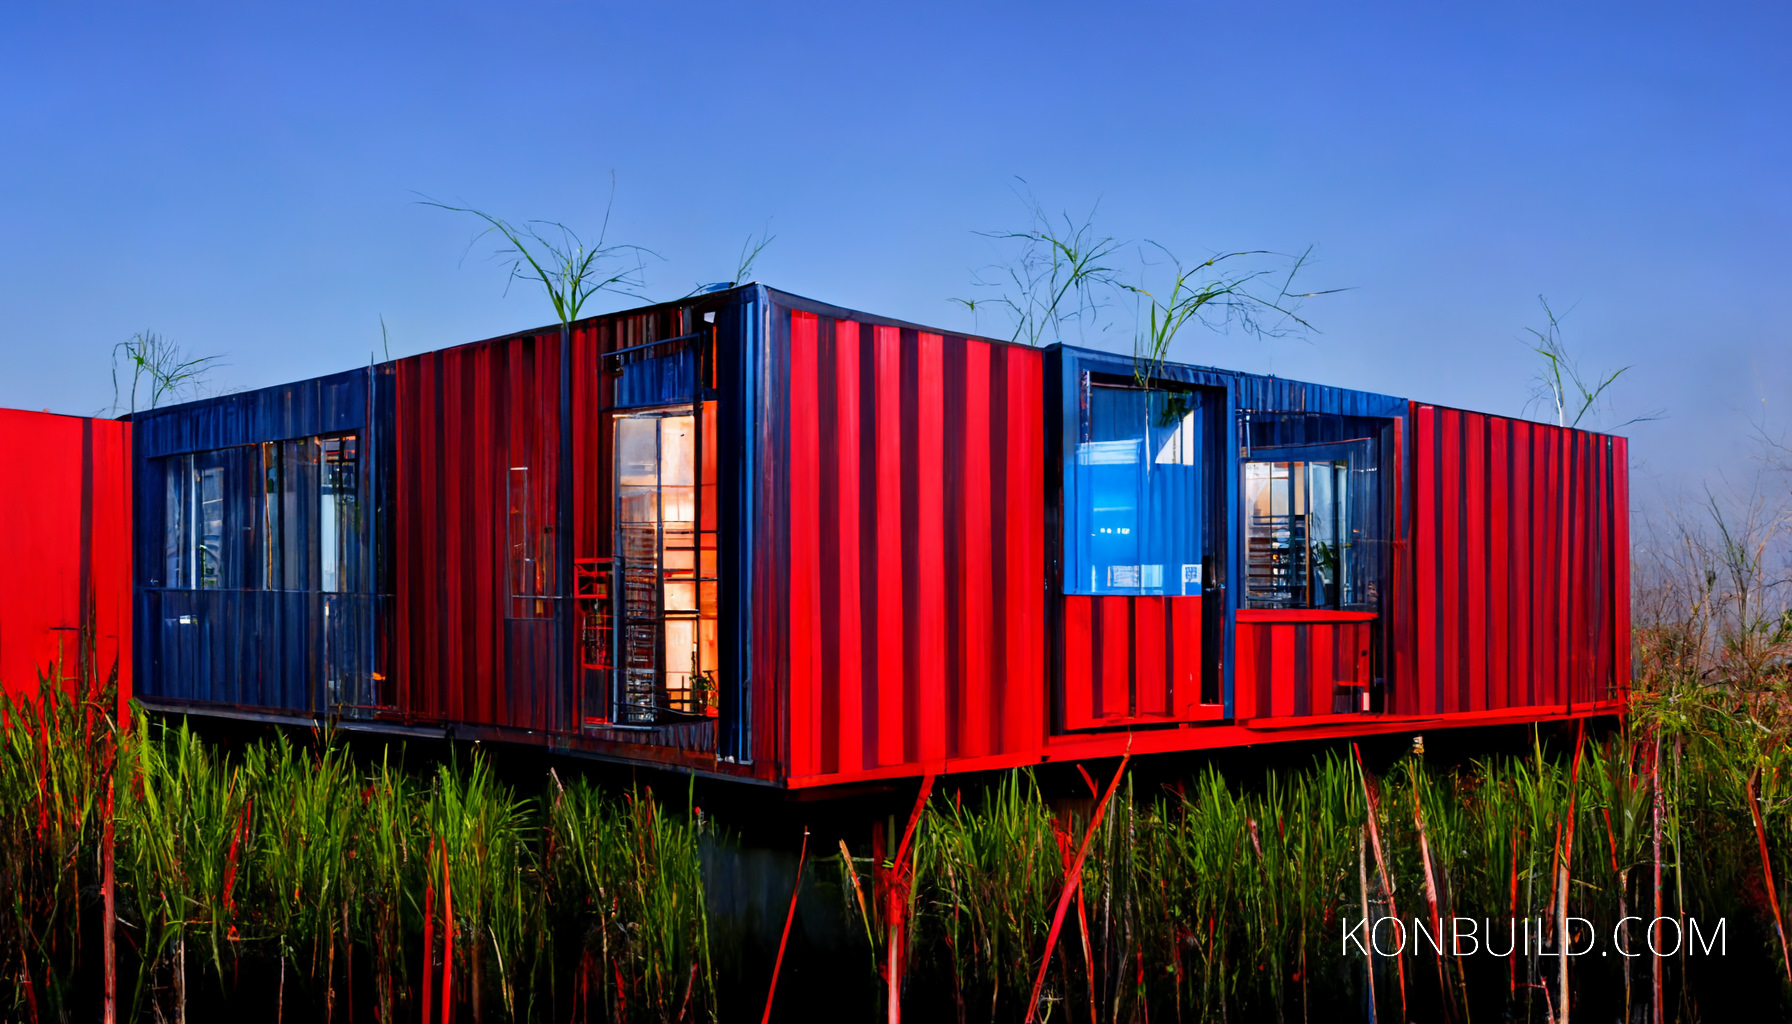 Concept artwork for a container home.